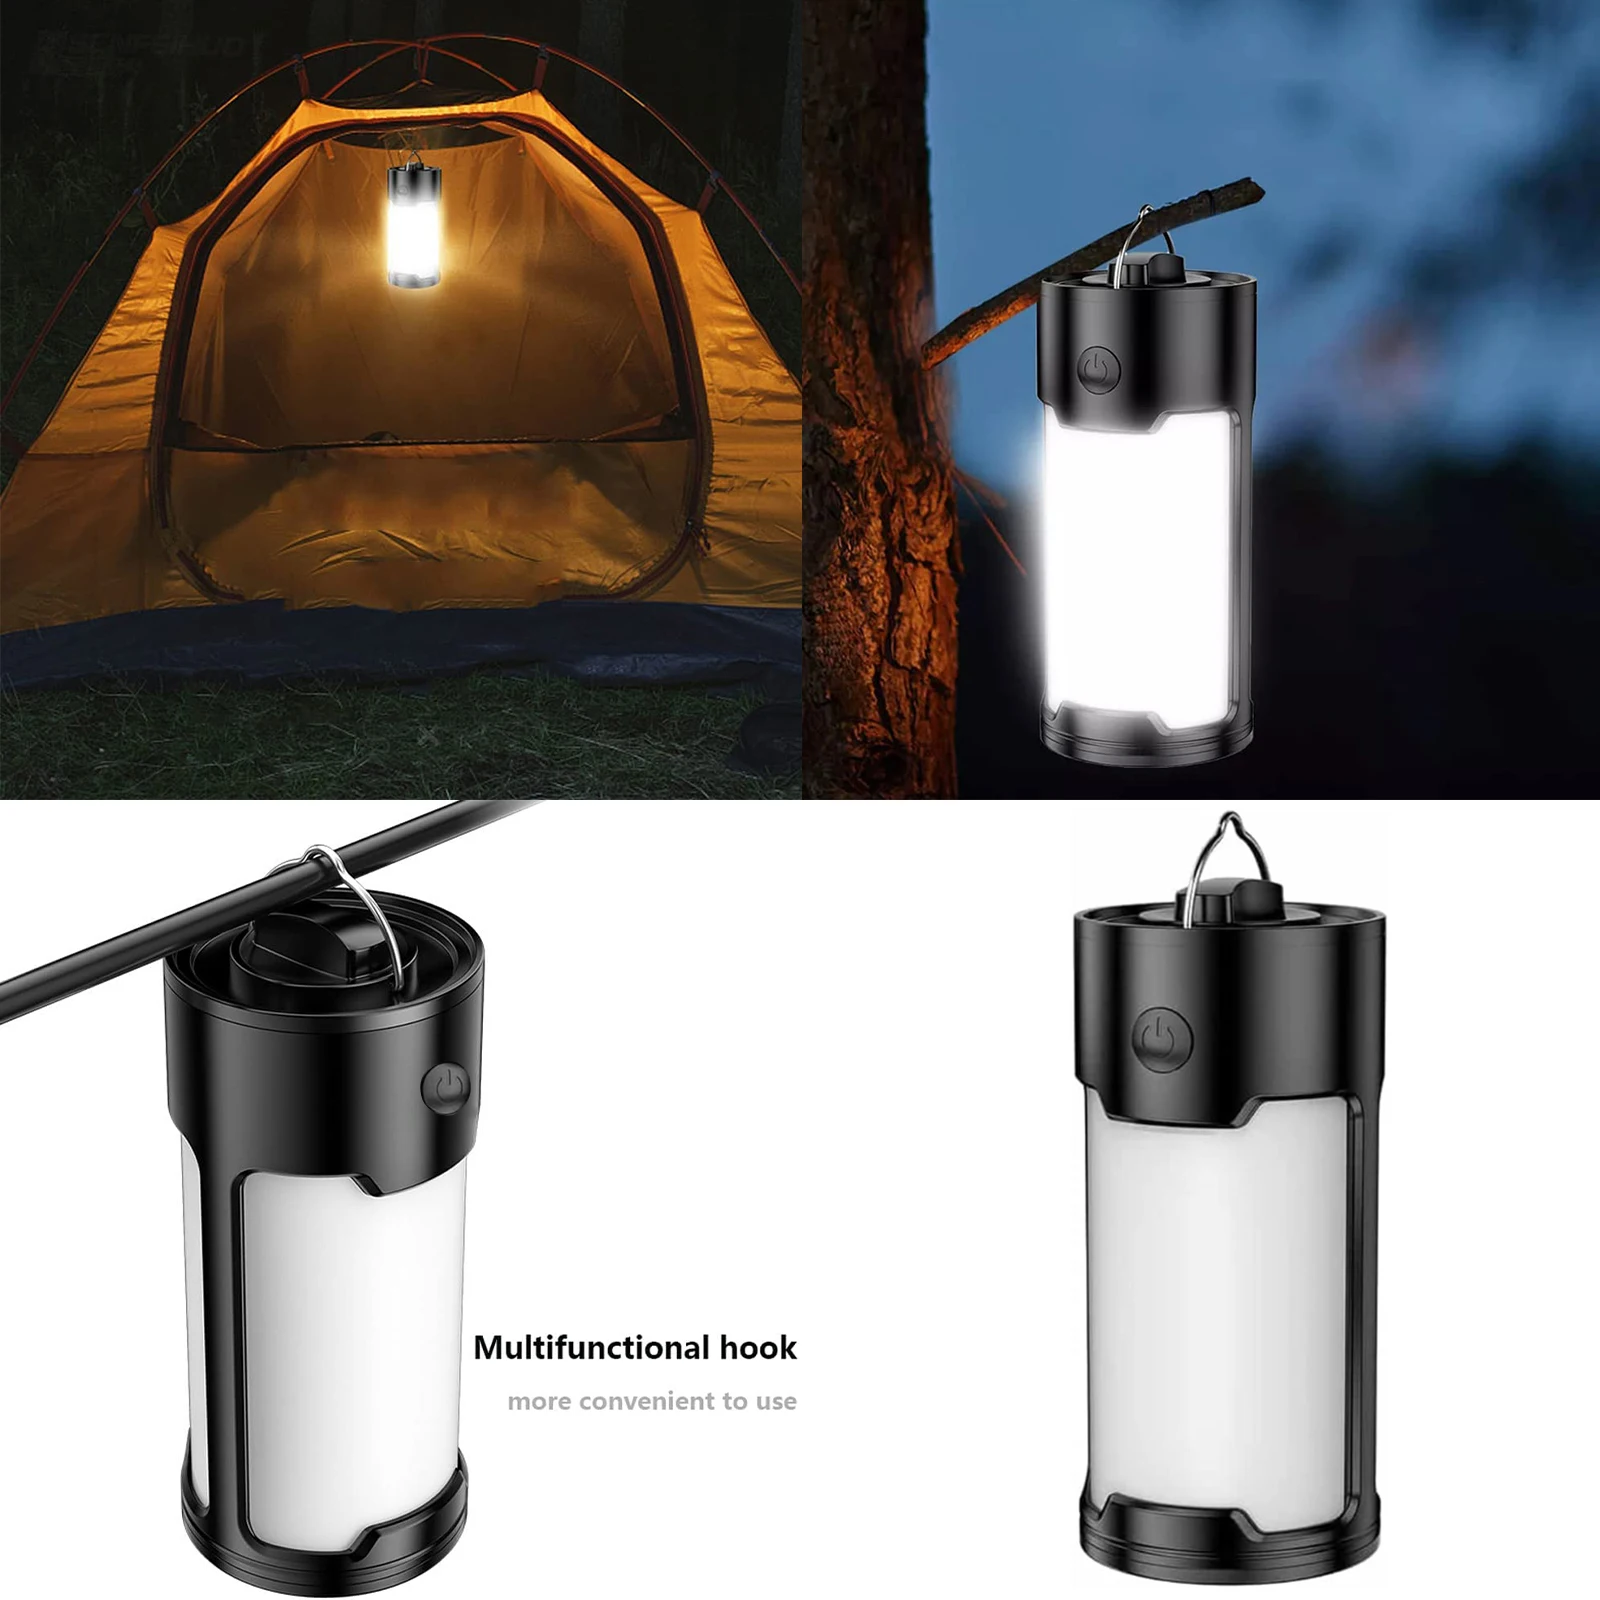 

Portable LED Camping Lights Super Bright Camping Lanterns Battery Powered IPX45 Waterproof 800 Lumens Camping Lamps For Indoors